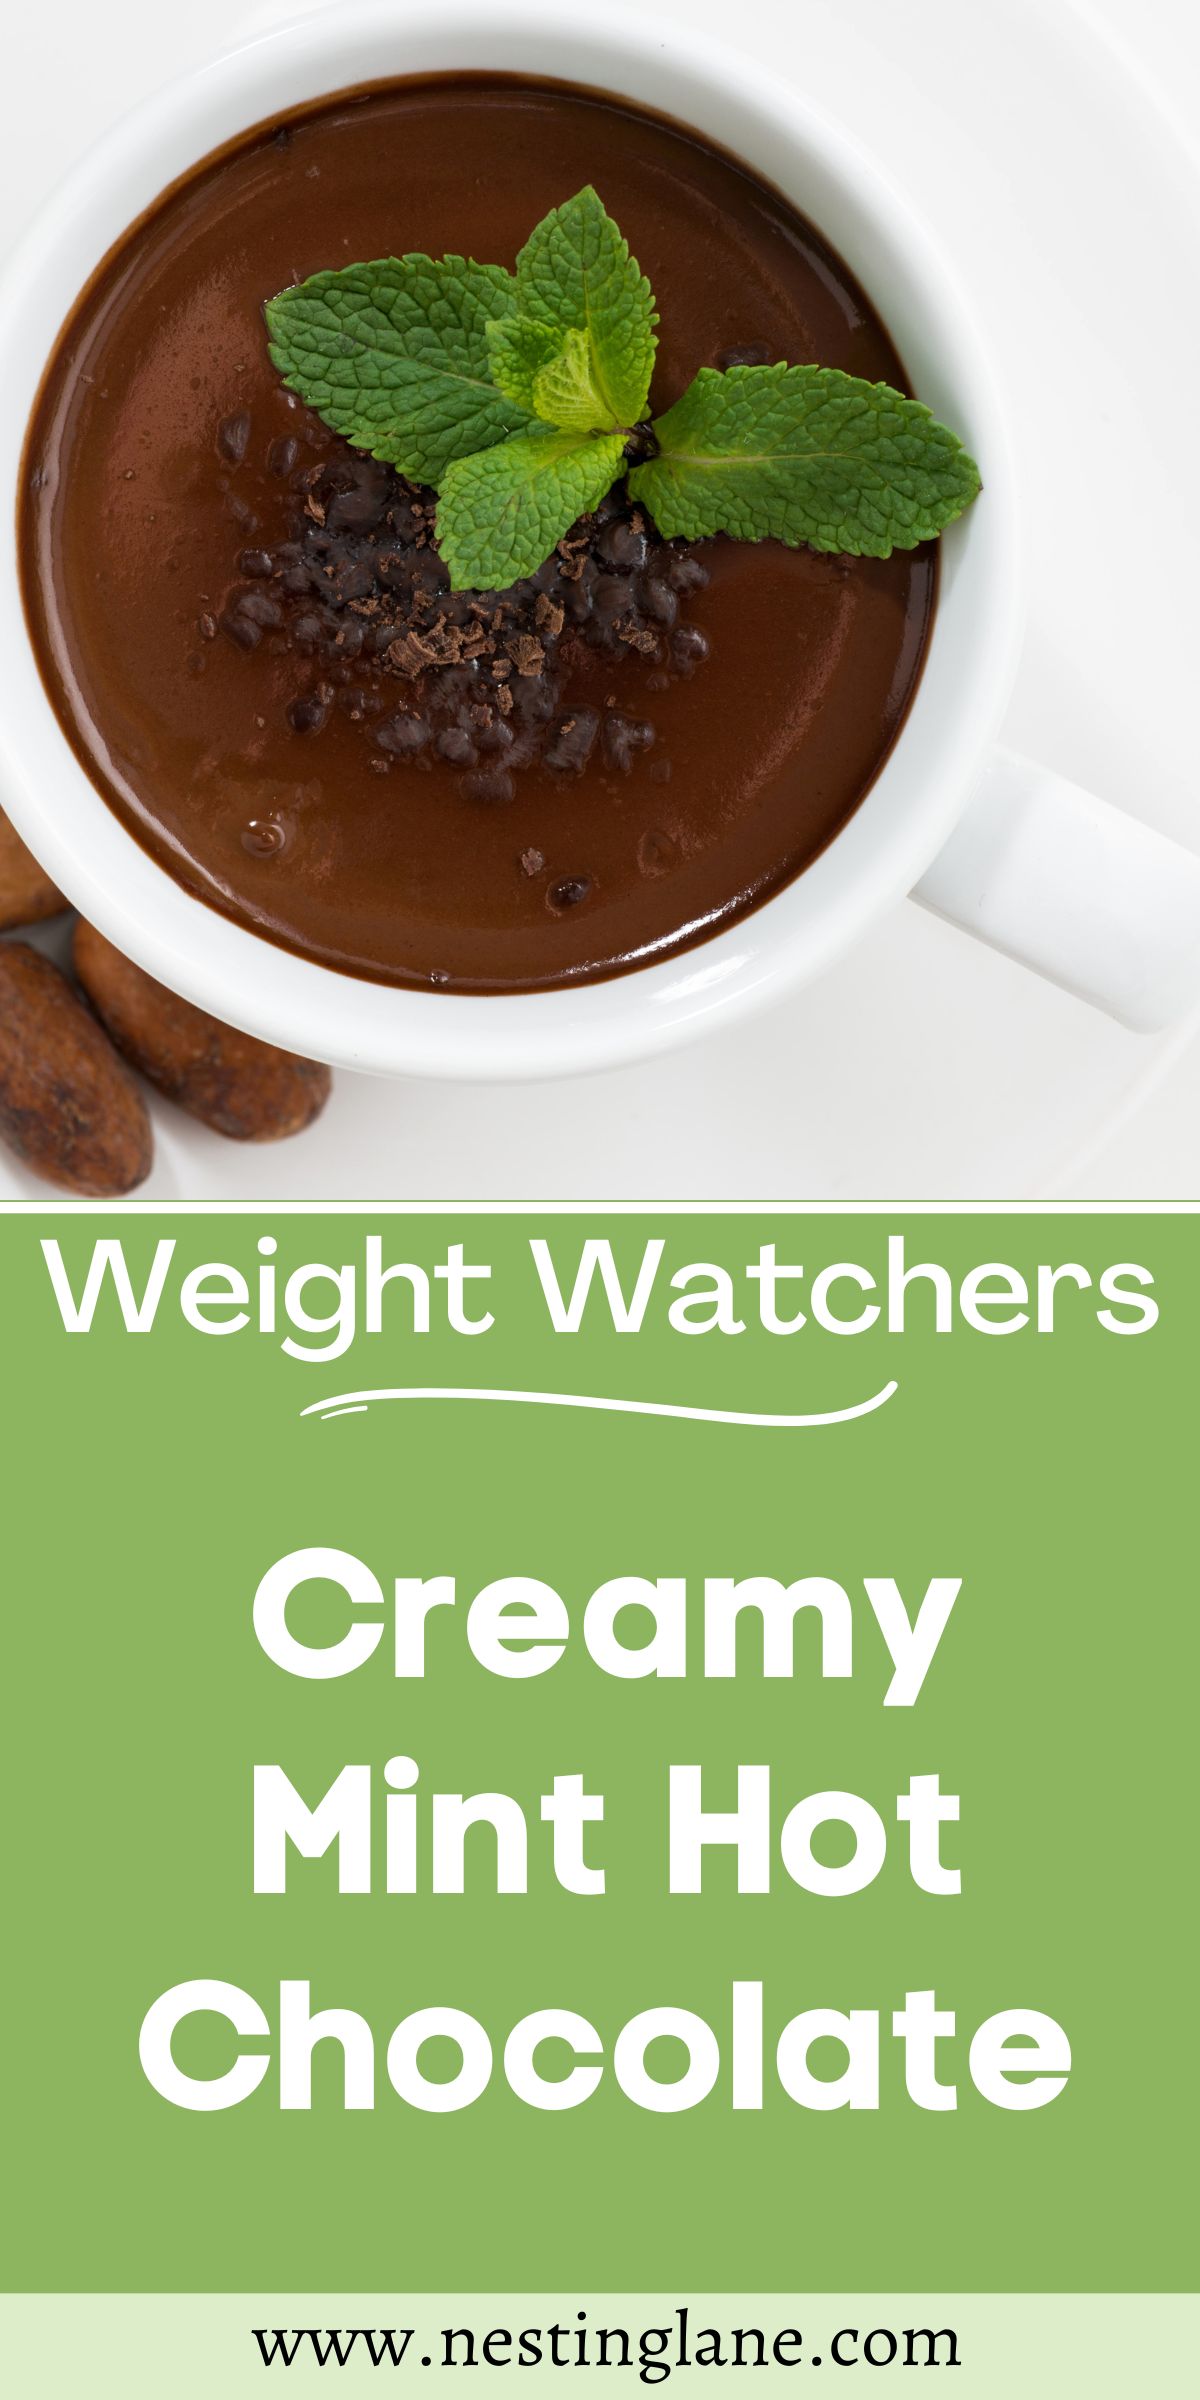 Graphic for Pinterest of Weight Watchers Mint Hot Chocolate Recipe.